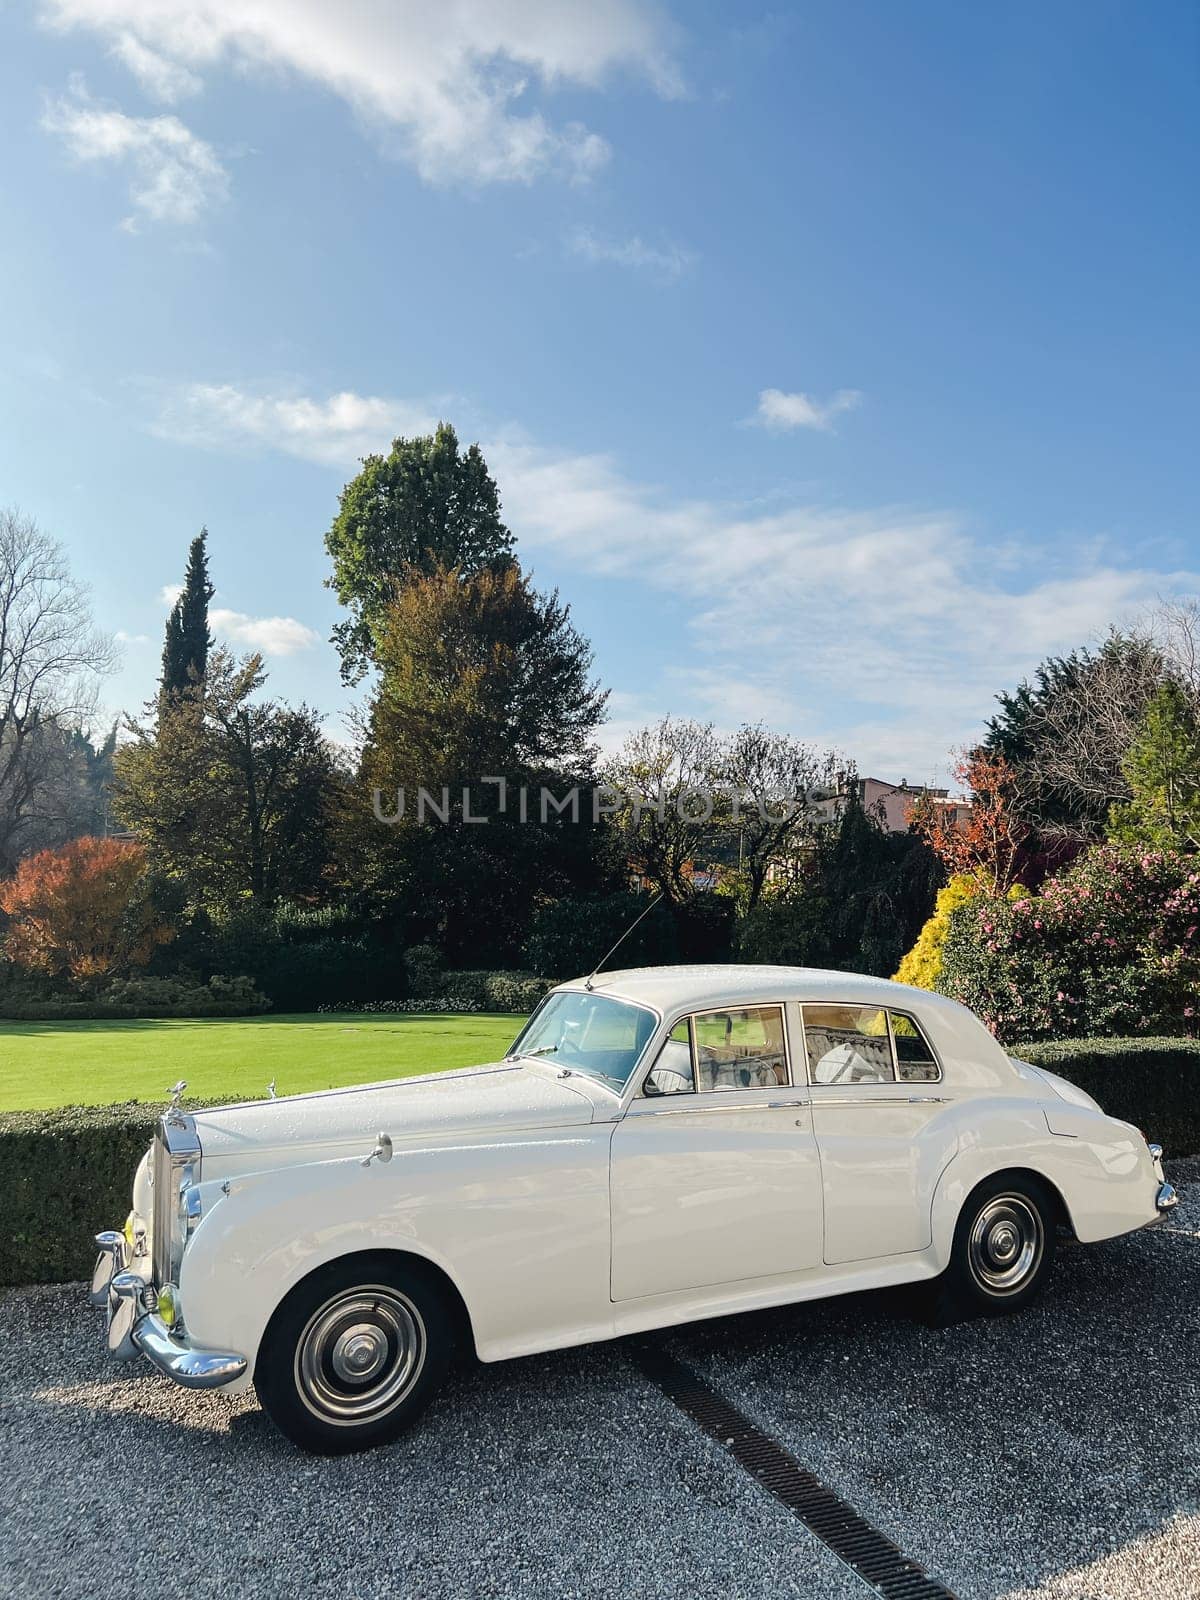 White Rolls-Royce Silver Cloud stands on a gravel path near green bushes in the park. High quality photo